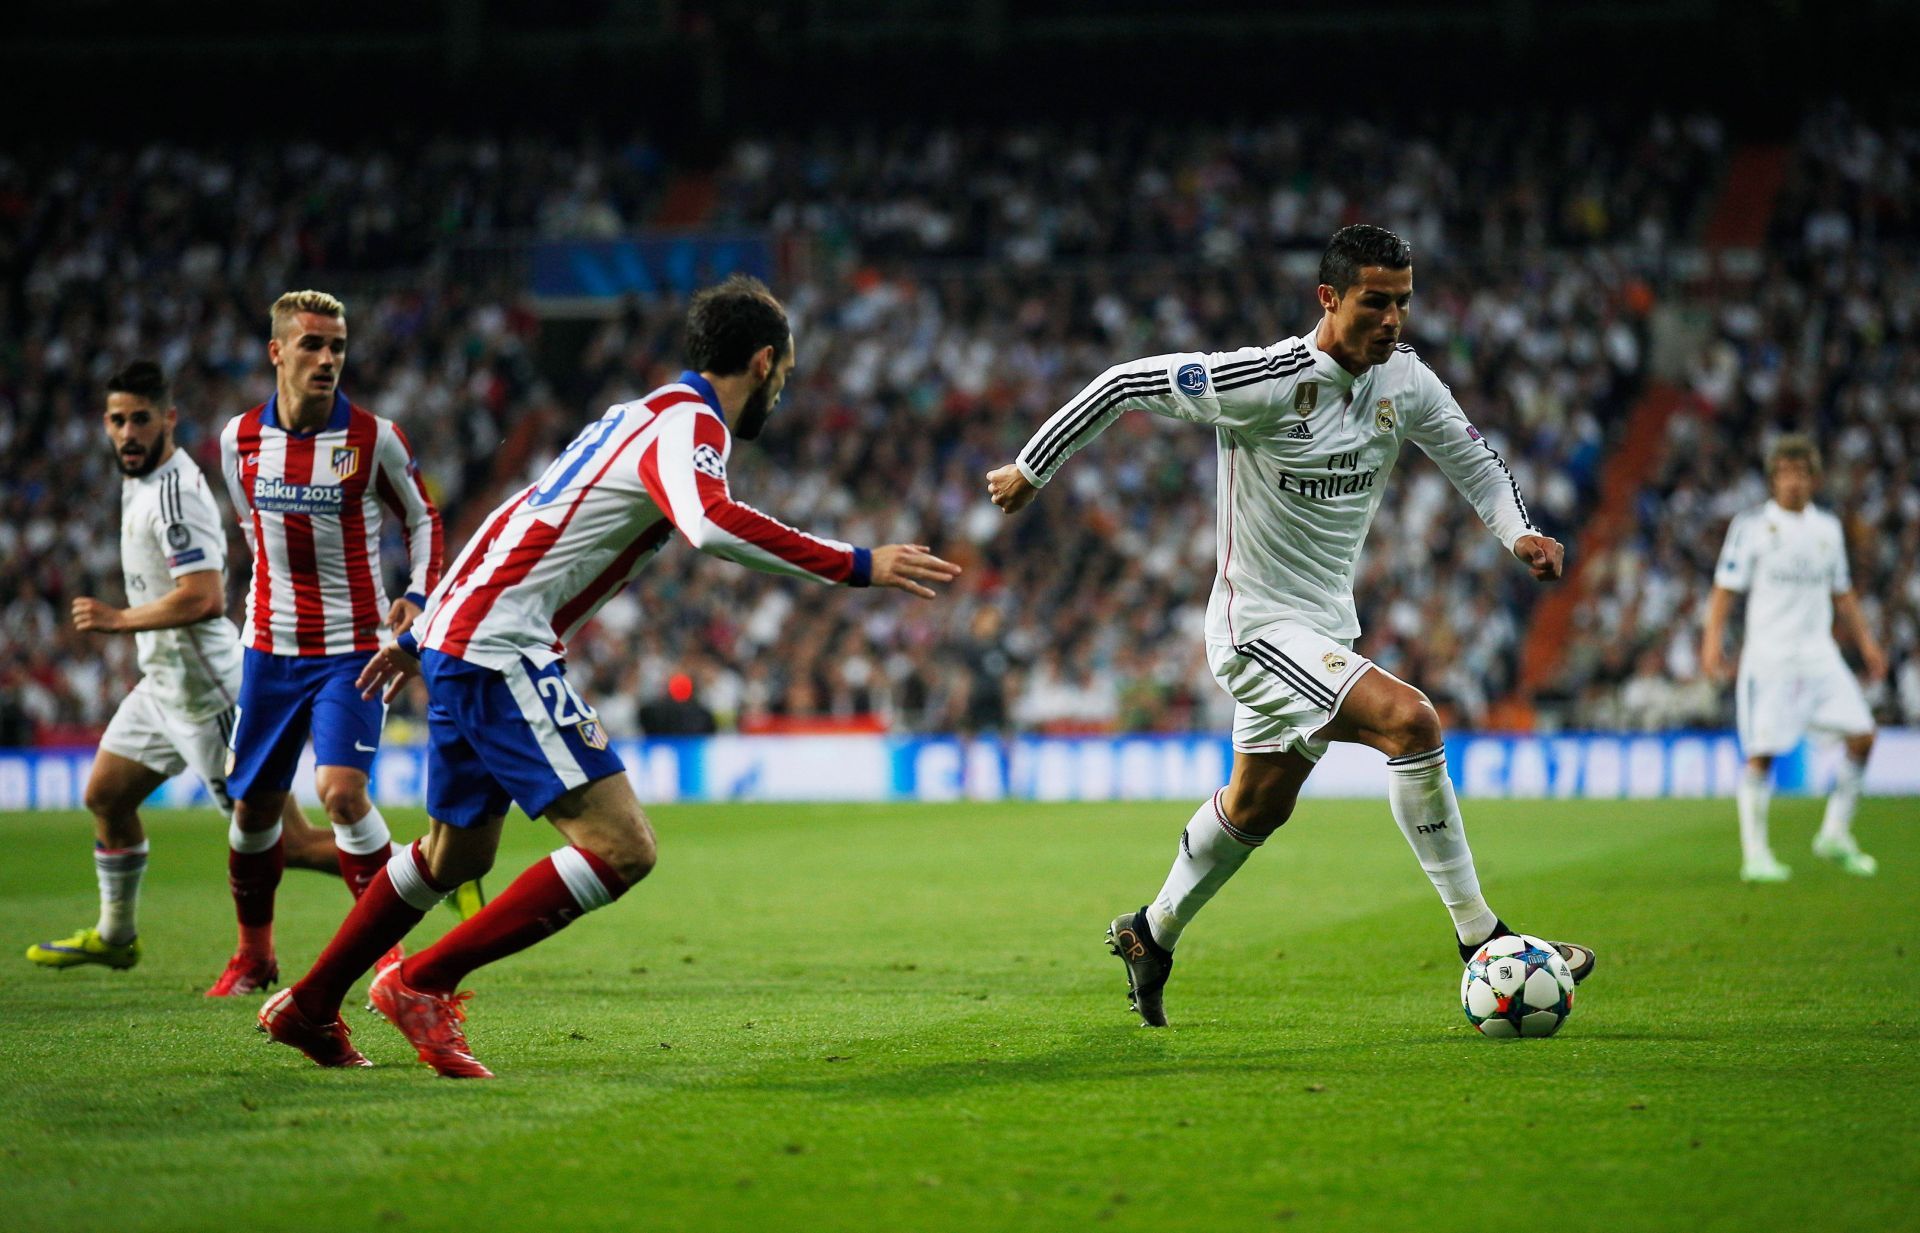 Atletico Madrid and Real Madrid have played some memorable matches in recent times.